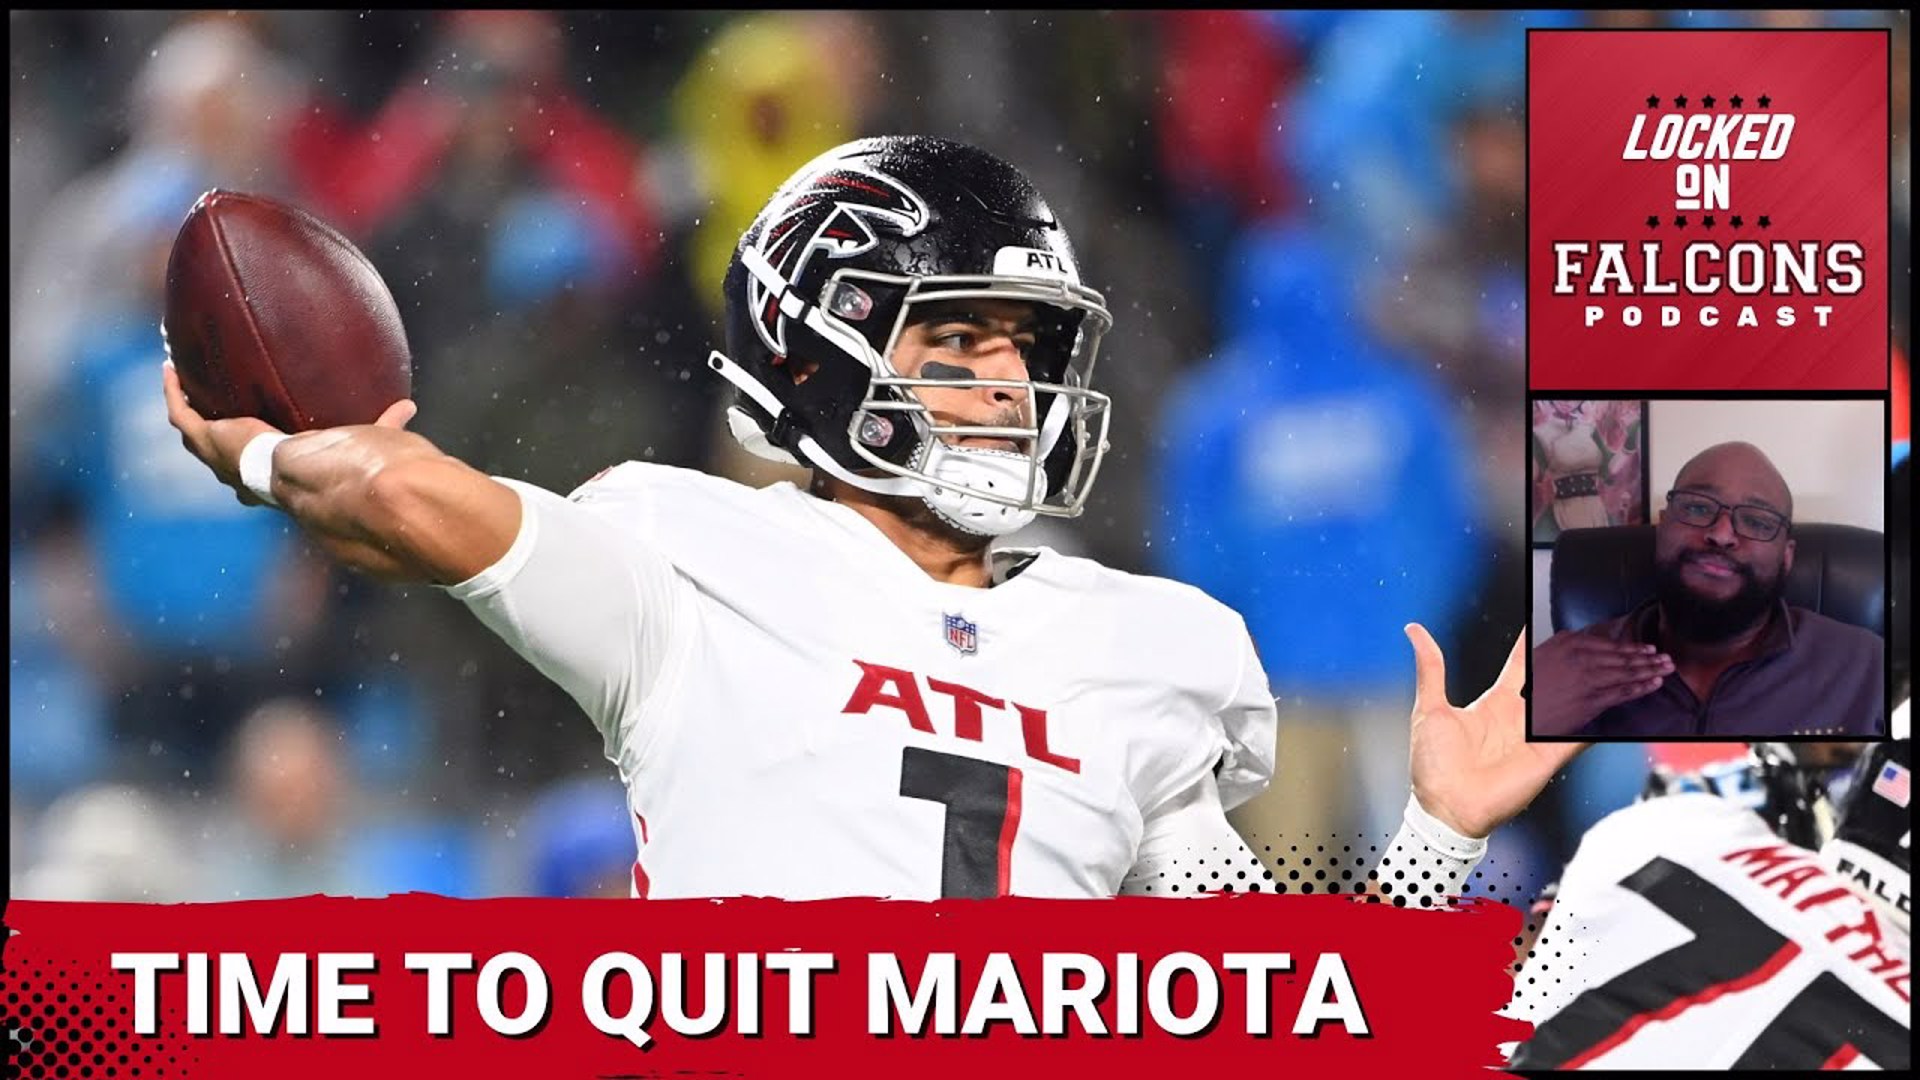 It's Time Atlanta Falcons Quit Marcus Mariota & Start Desmond Ridder After Thursday Loss to Panthers